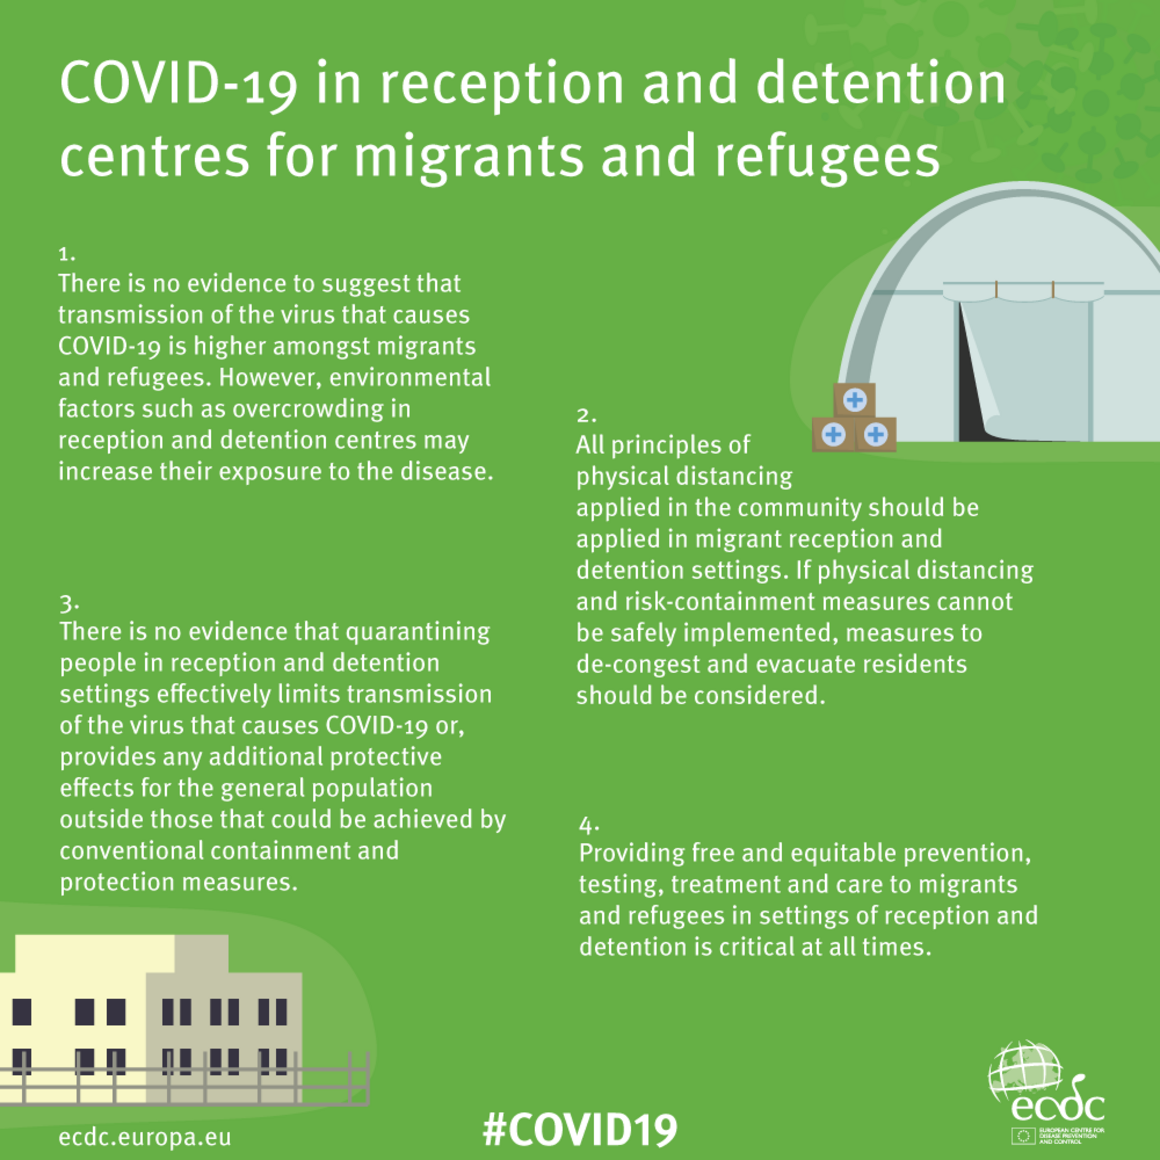 Infographic: COVID-19 in reception and detention centres for migrants and refugees